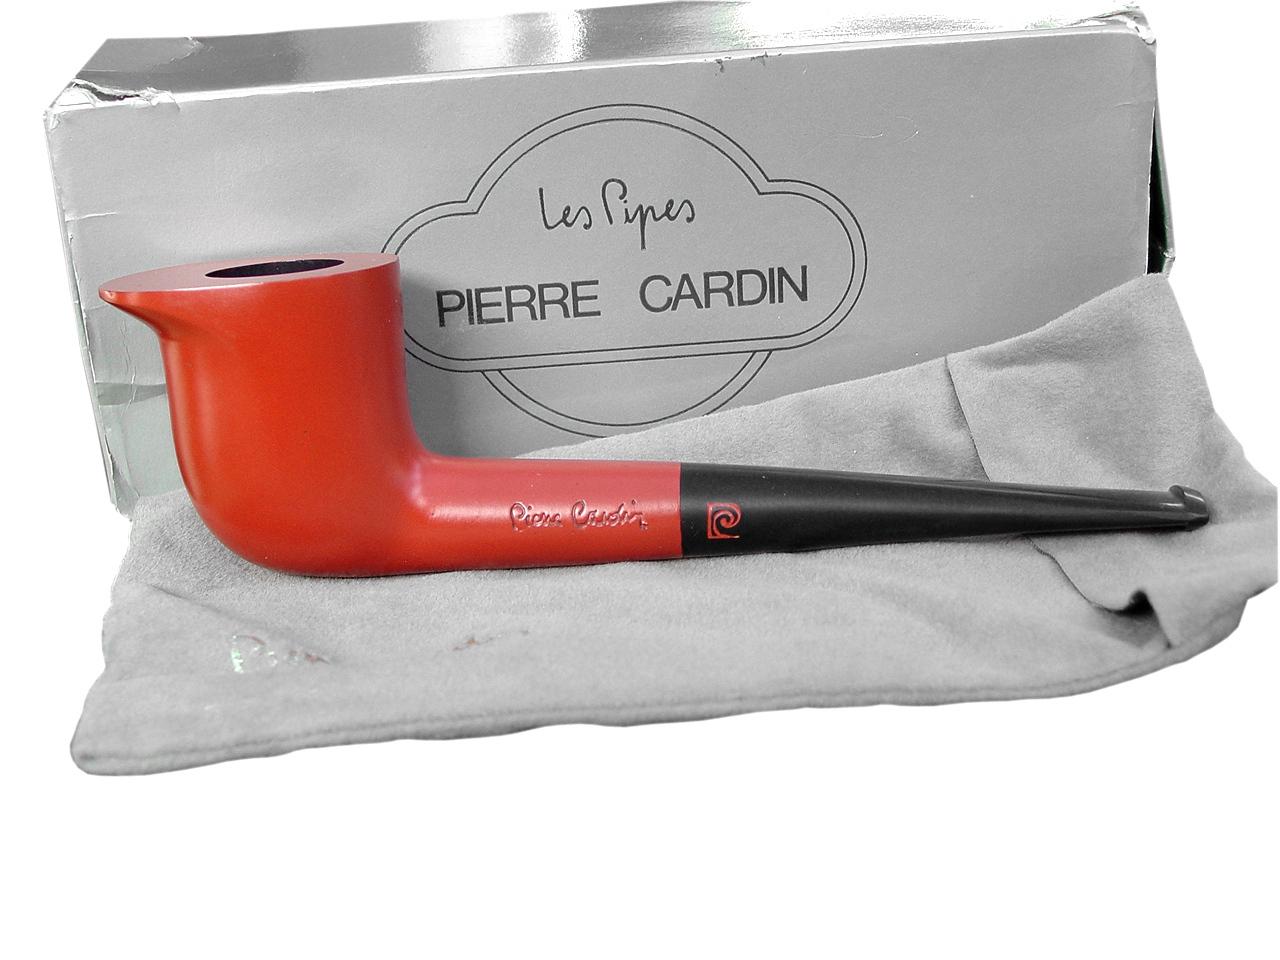 Pierre Cardin Les Pipes design and perfect pipe in mahogany and resin material

The sell is of one 